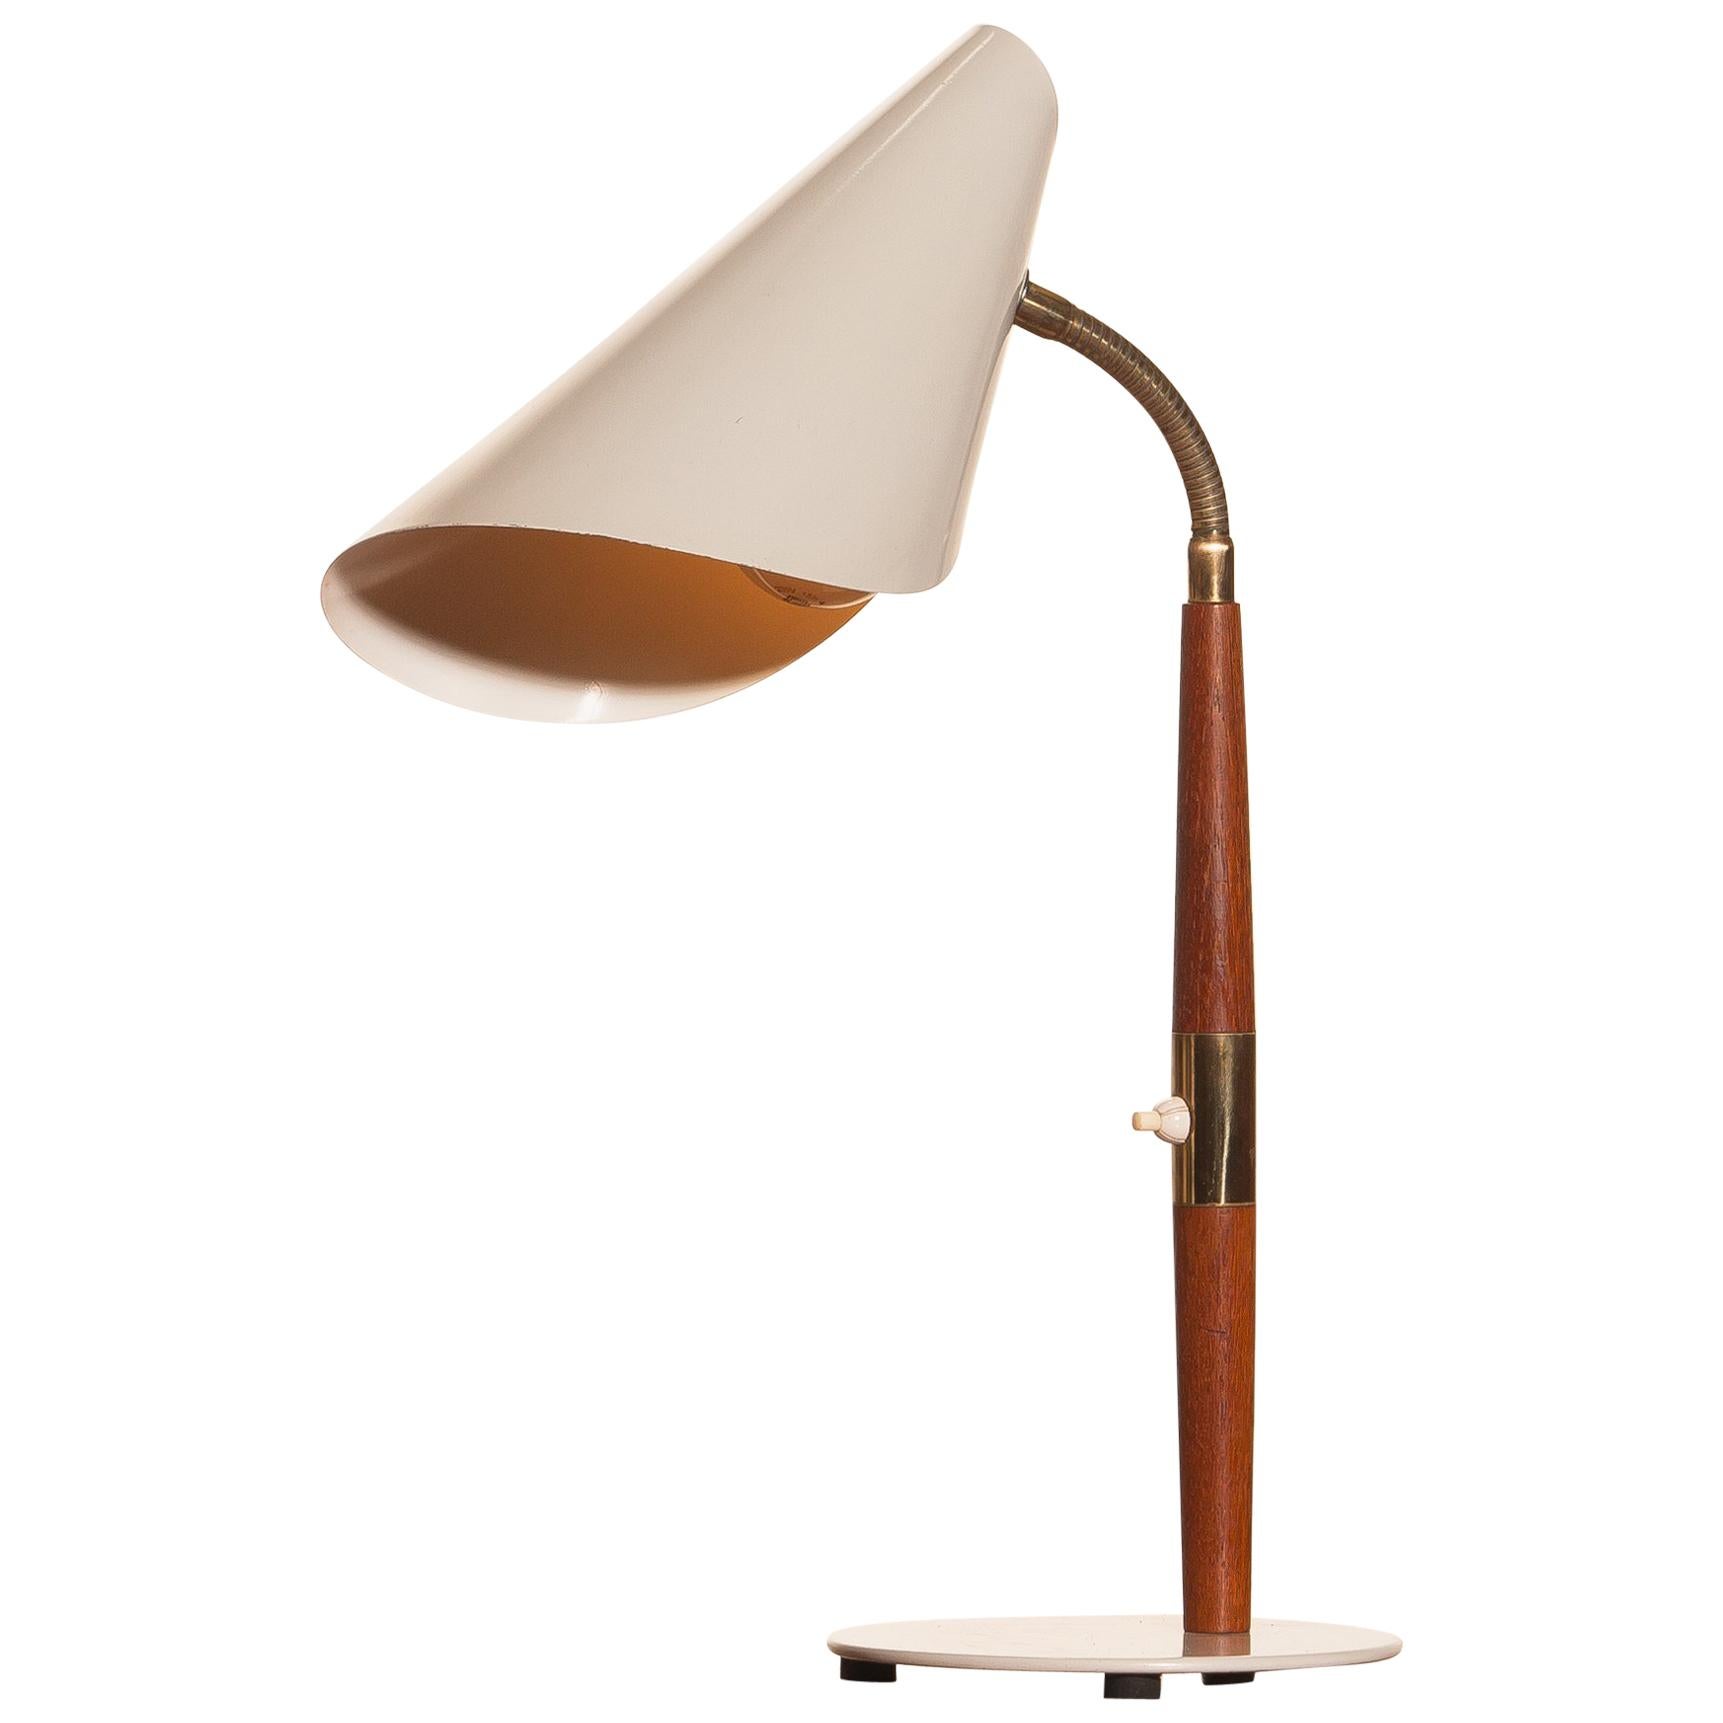 1960s, Off White with Teak and Brass Elements Desk or Table Lamp by Karlskrona